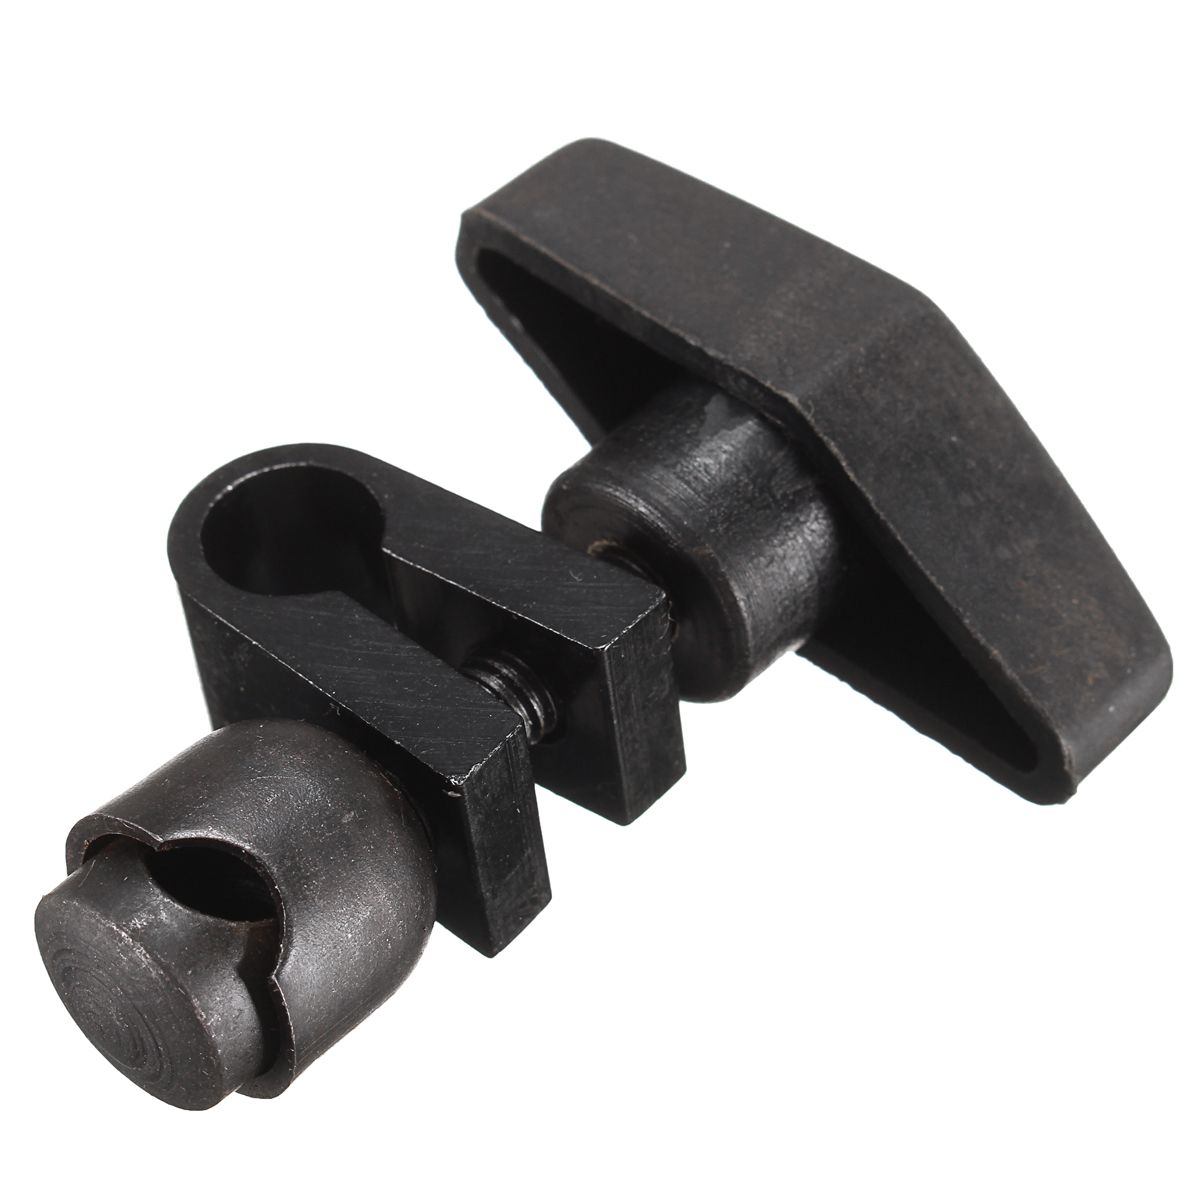 Holder-Clamp-Retainer-Clip-Magnetic-Stands-Dial-Indicatior-Guage-Chuck-8-10mm-1162836